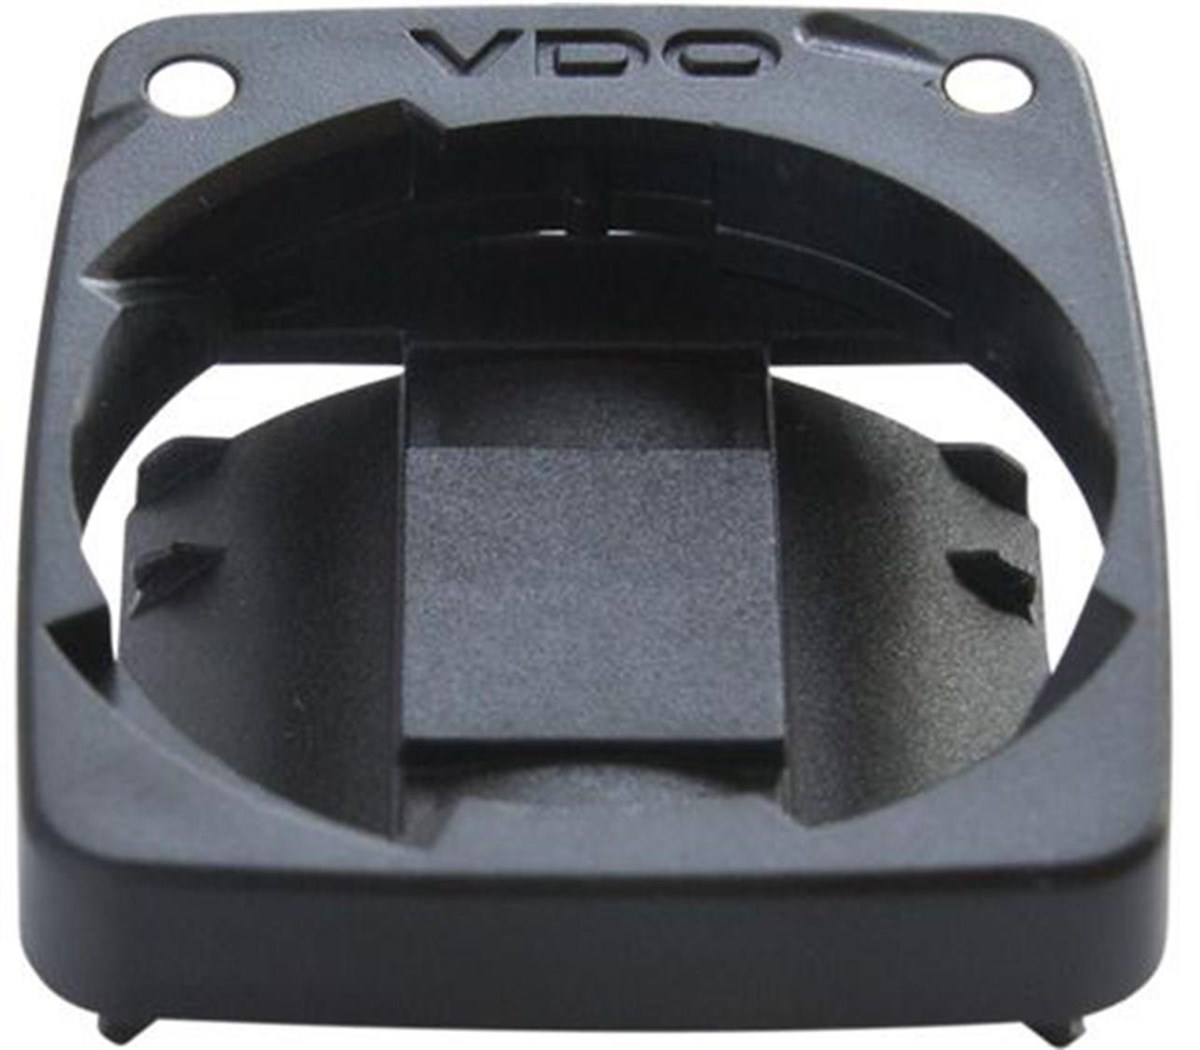 VDO M-Series Wireless mount for M5 WL + M6 WL product image